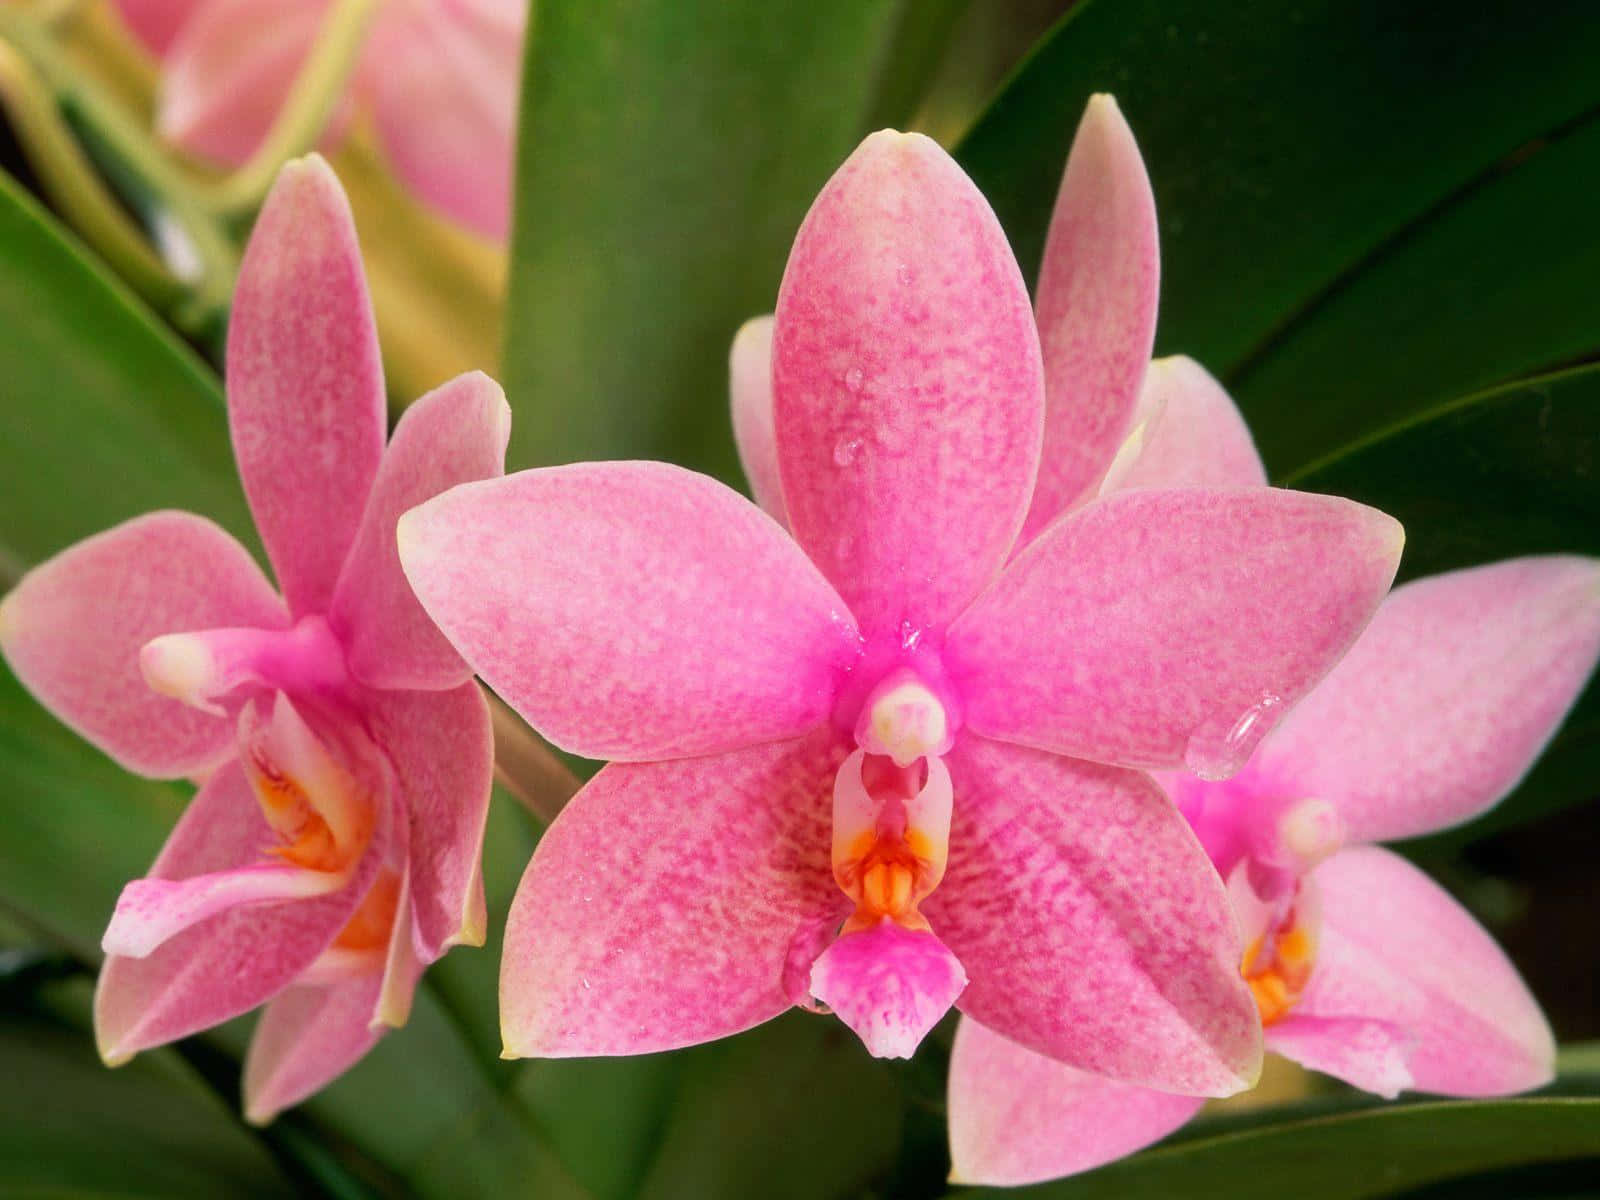 Magical Splash of Color - A Lovely Pink Orchid